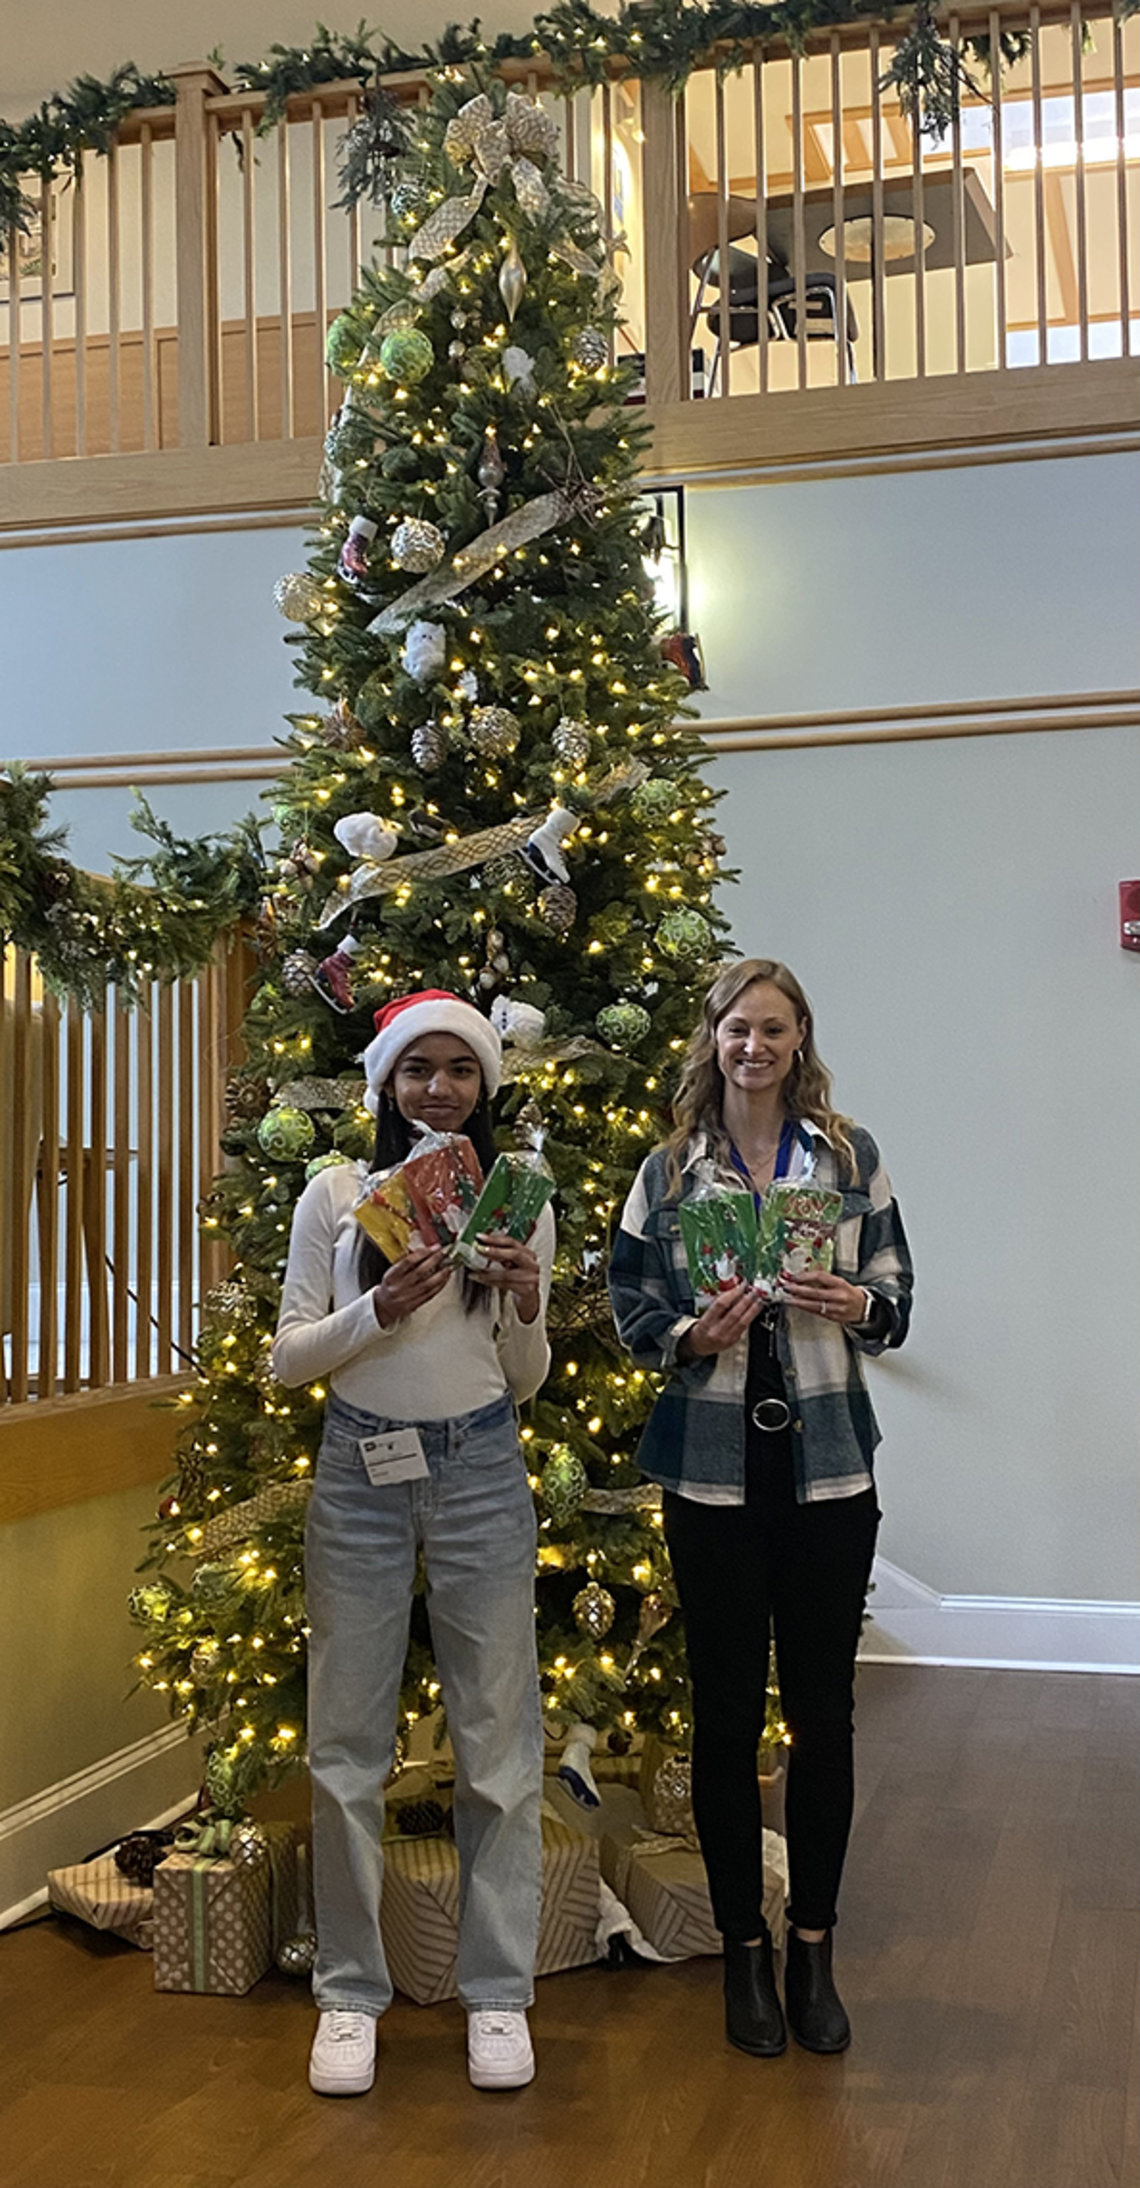 Sampson and Smith stand smiling in front of tall Christmas tree inside the Children's Inn.